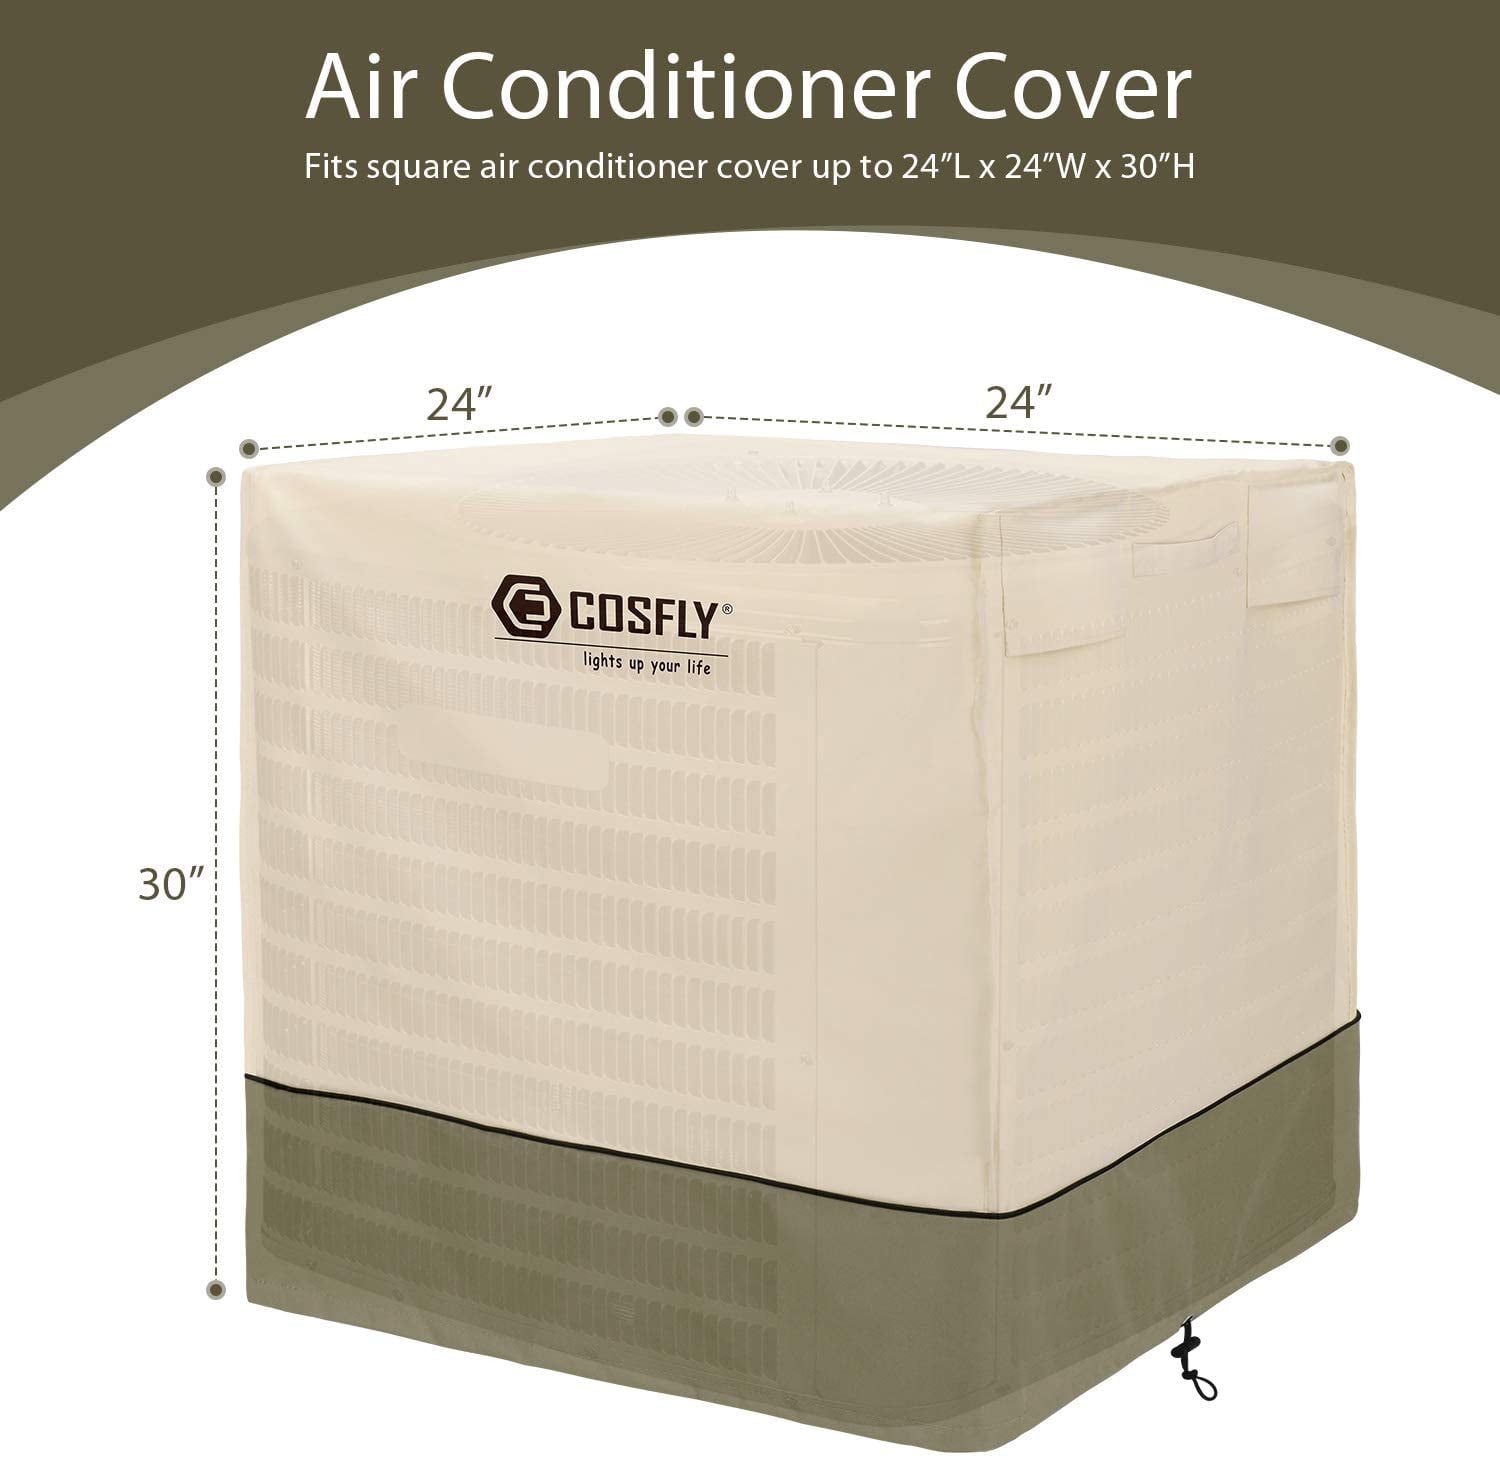 Heavy Duty 600D Water Resistant Fabric for Outdoor Protection Air Conditioner Cover for Outside Central AC Units Square AC Cover Fits Up to 24×24×30